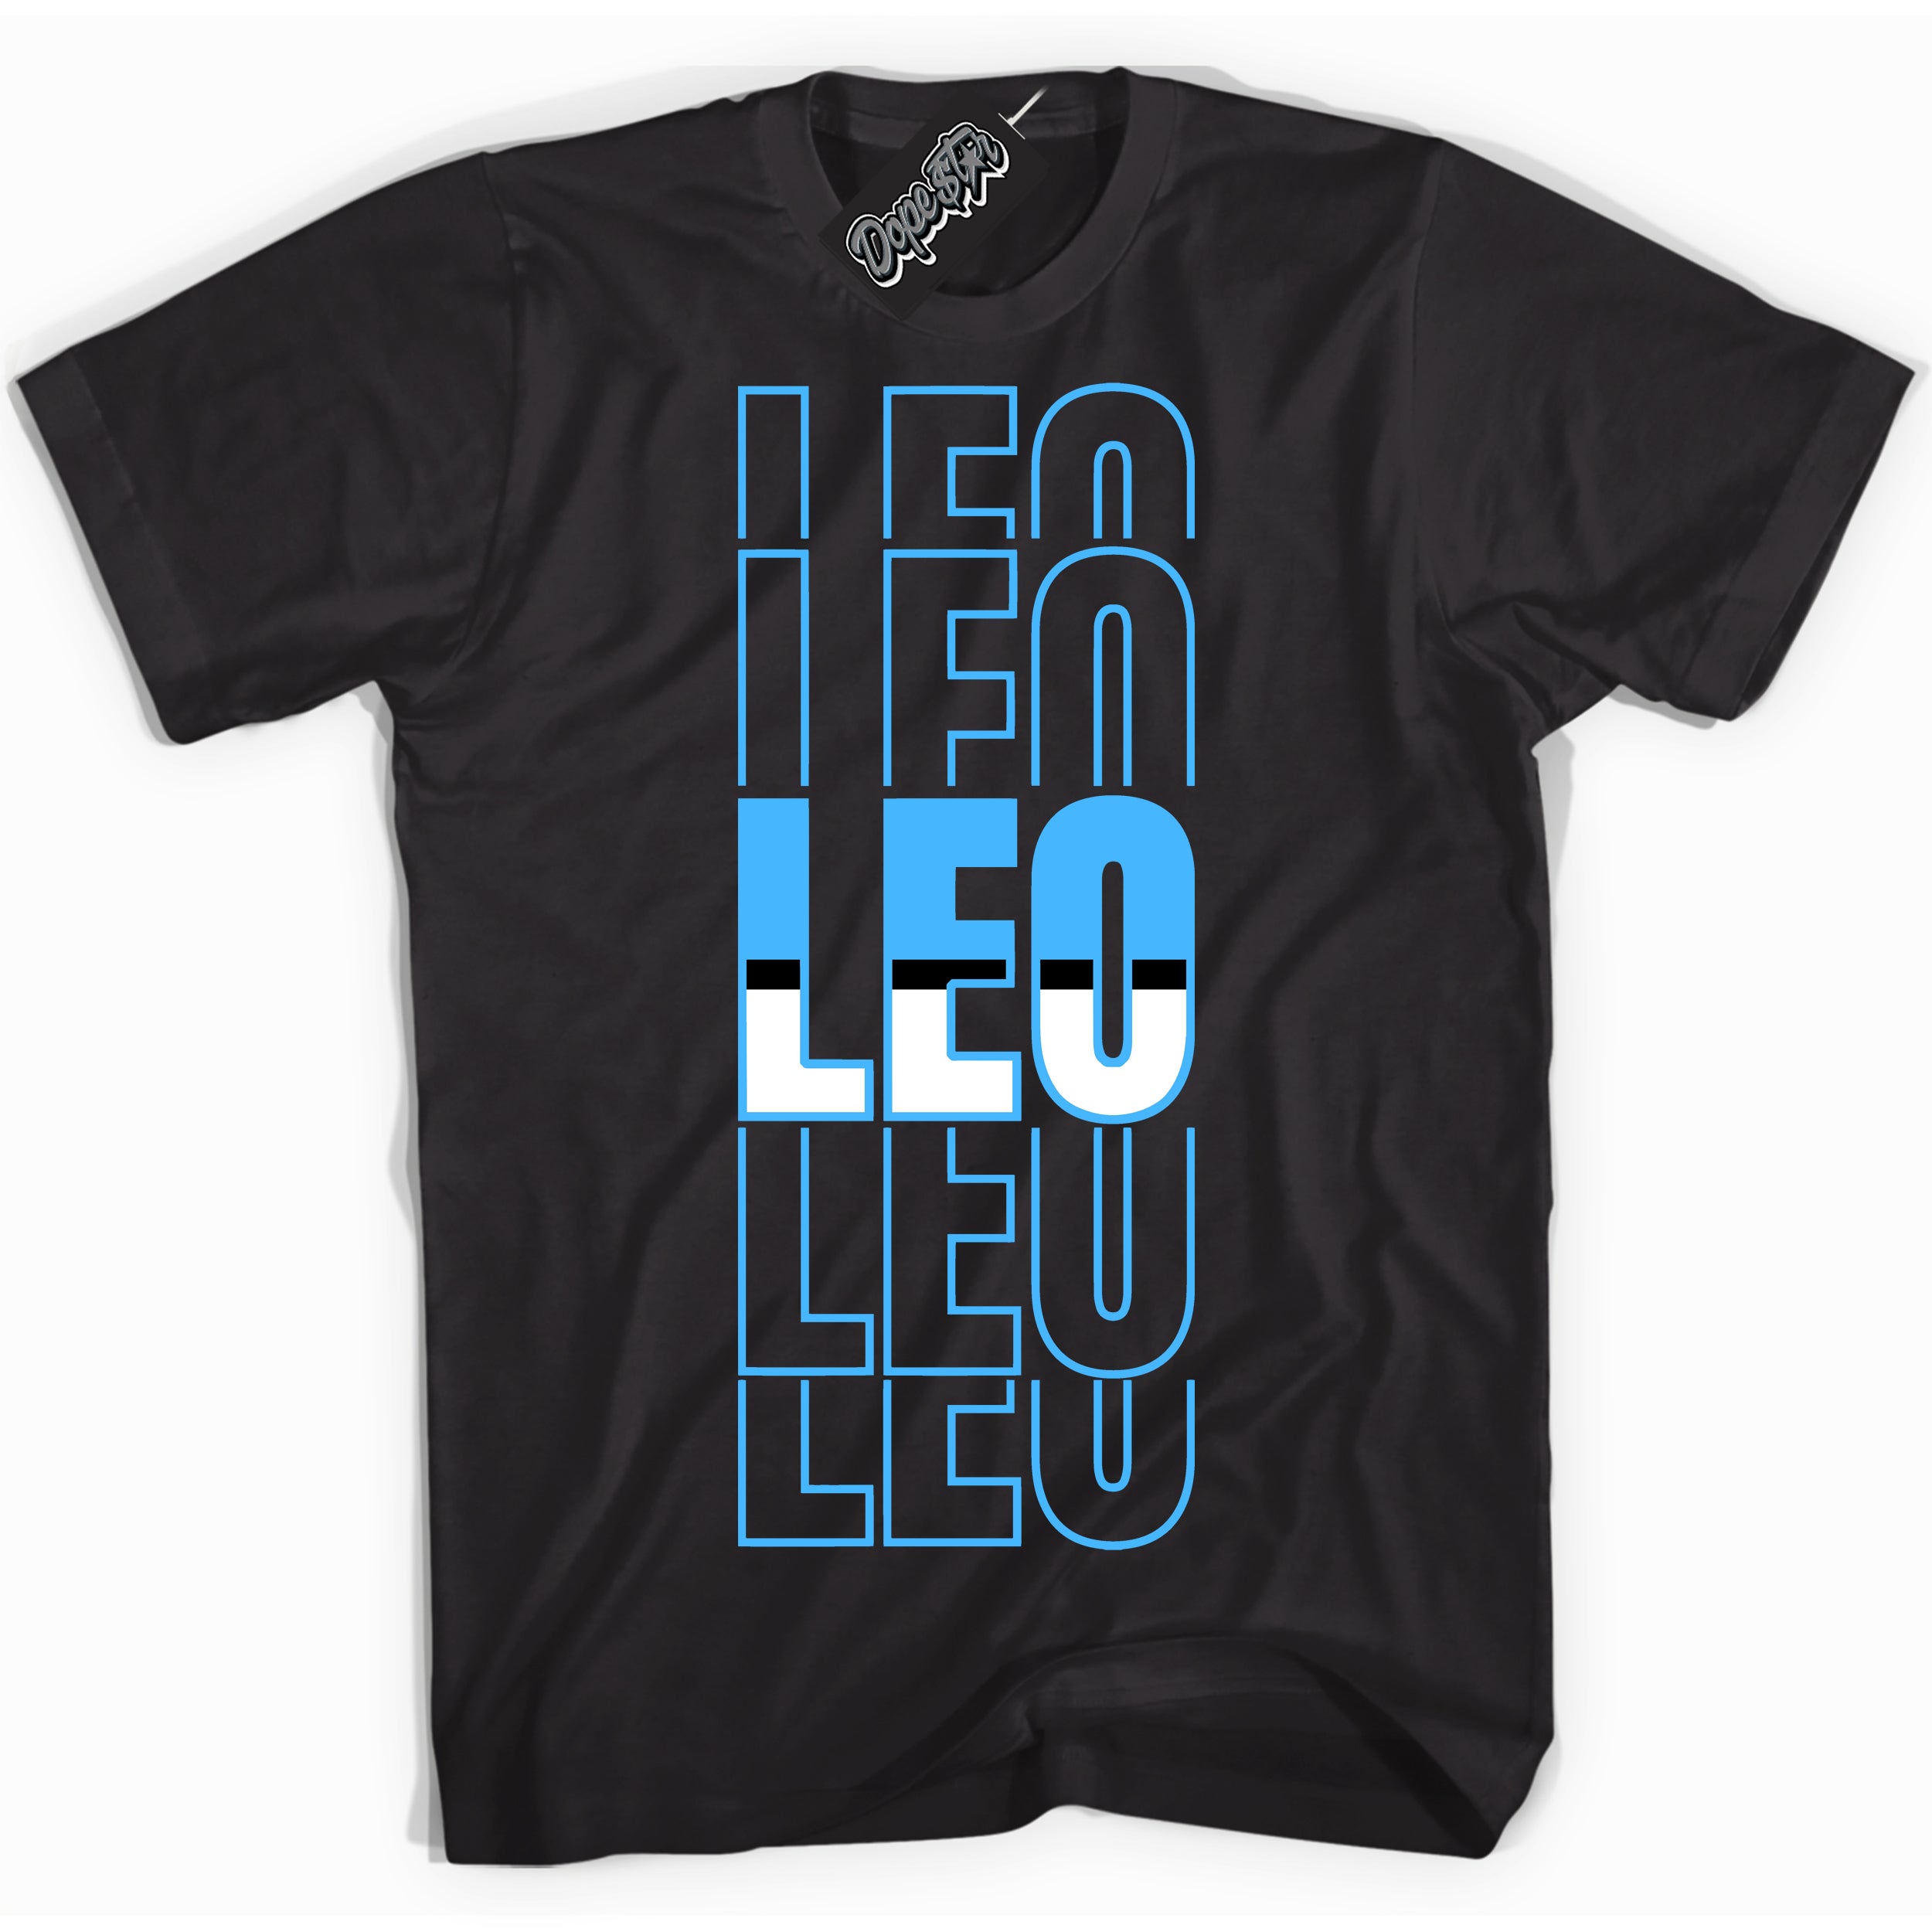 Cool Black graphic tee with “ Leo ” design, that perfectly matches Powder Blue 9s sneakers 